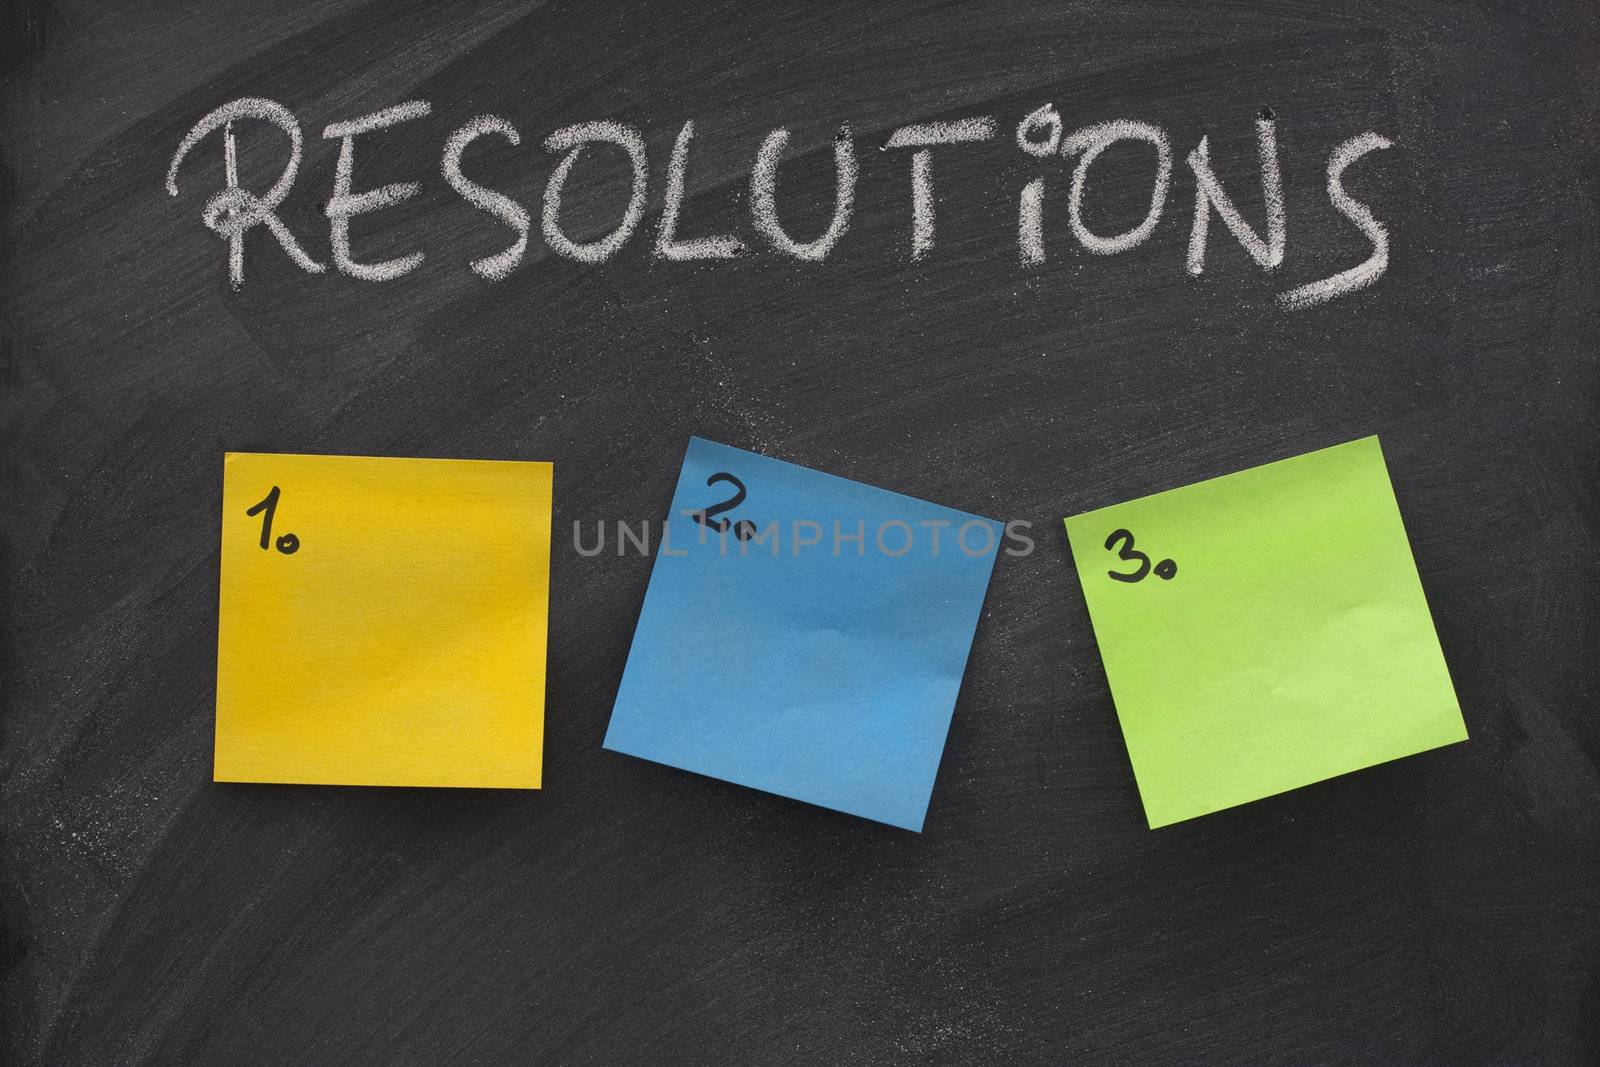 list of resolutions on blackboard with three blank, numbered sticky notes